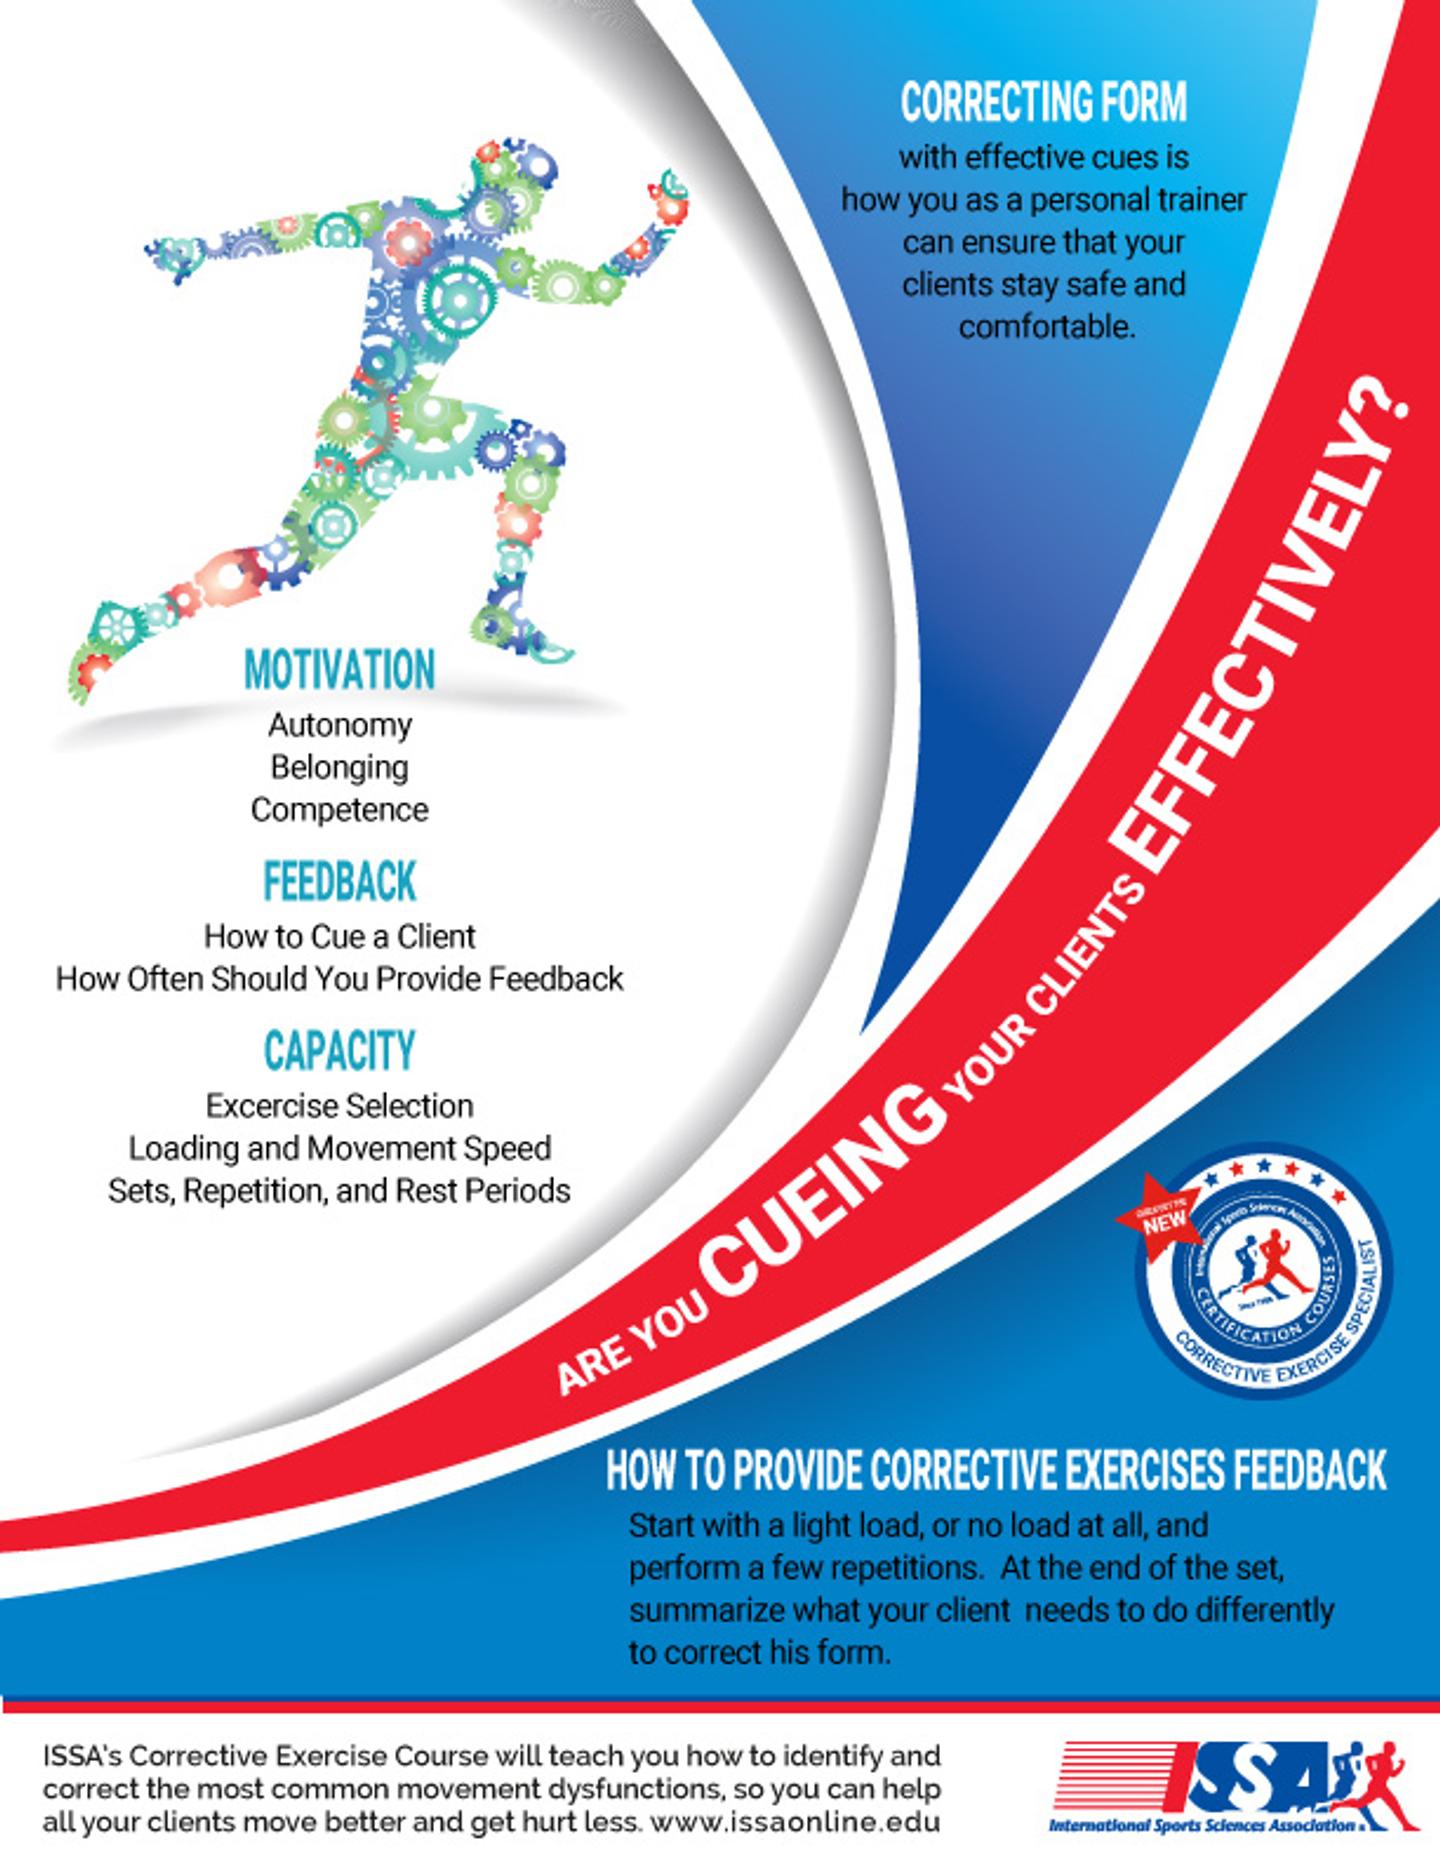 ISSA, International Sports Sciences Association, Certified Personal Trainer, ISSAonline, Corrective Exercise,Corrective Exercises: Helping clients move, feel and live better, Are you cueing your clients effectively? Inforgraphic